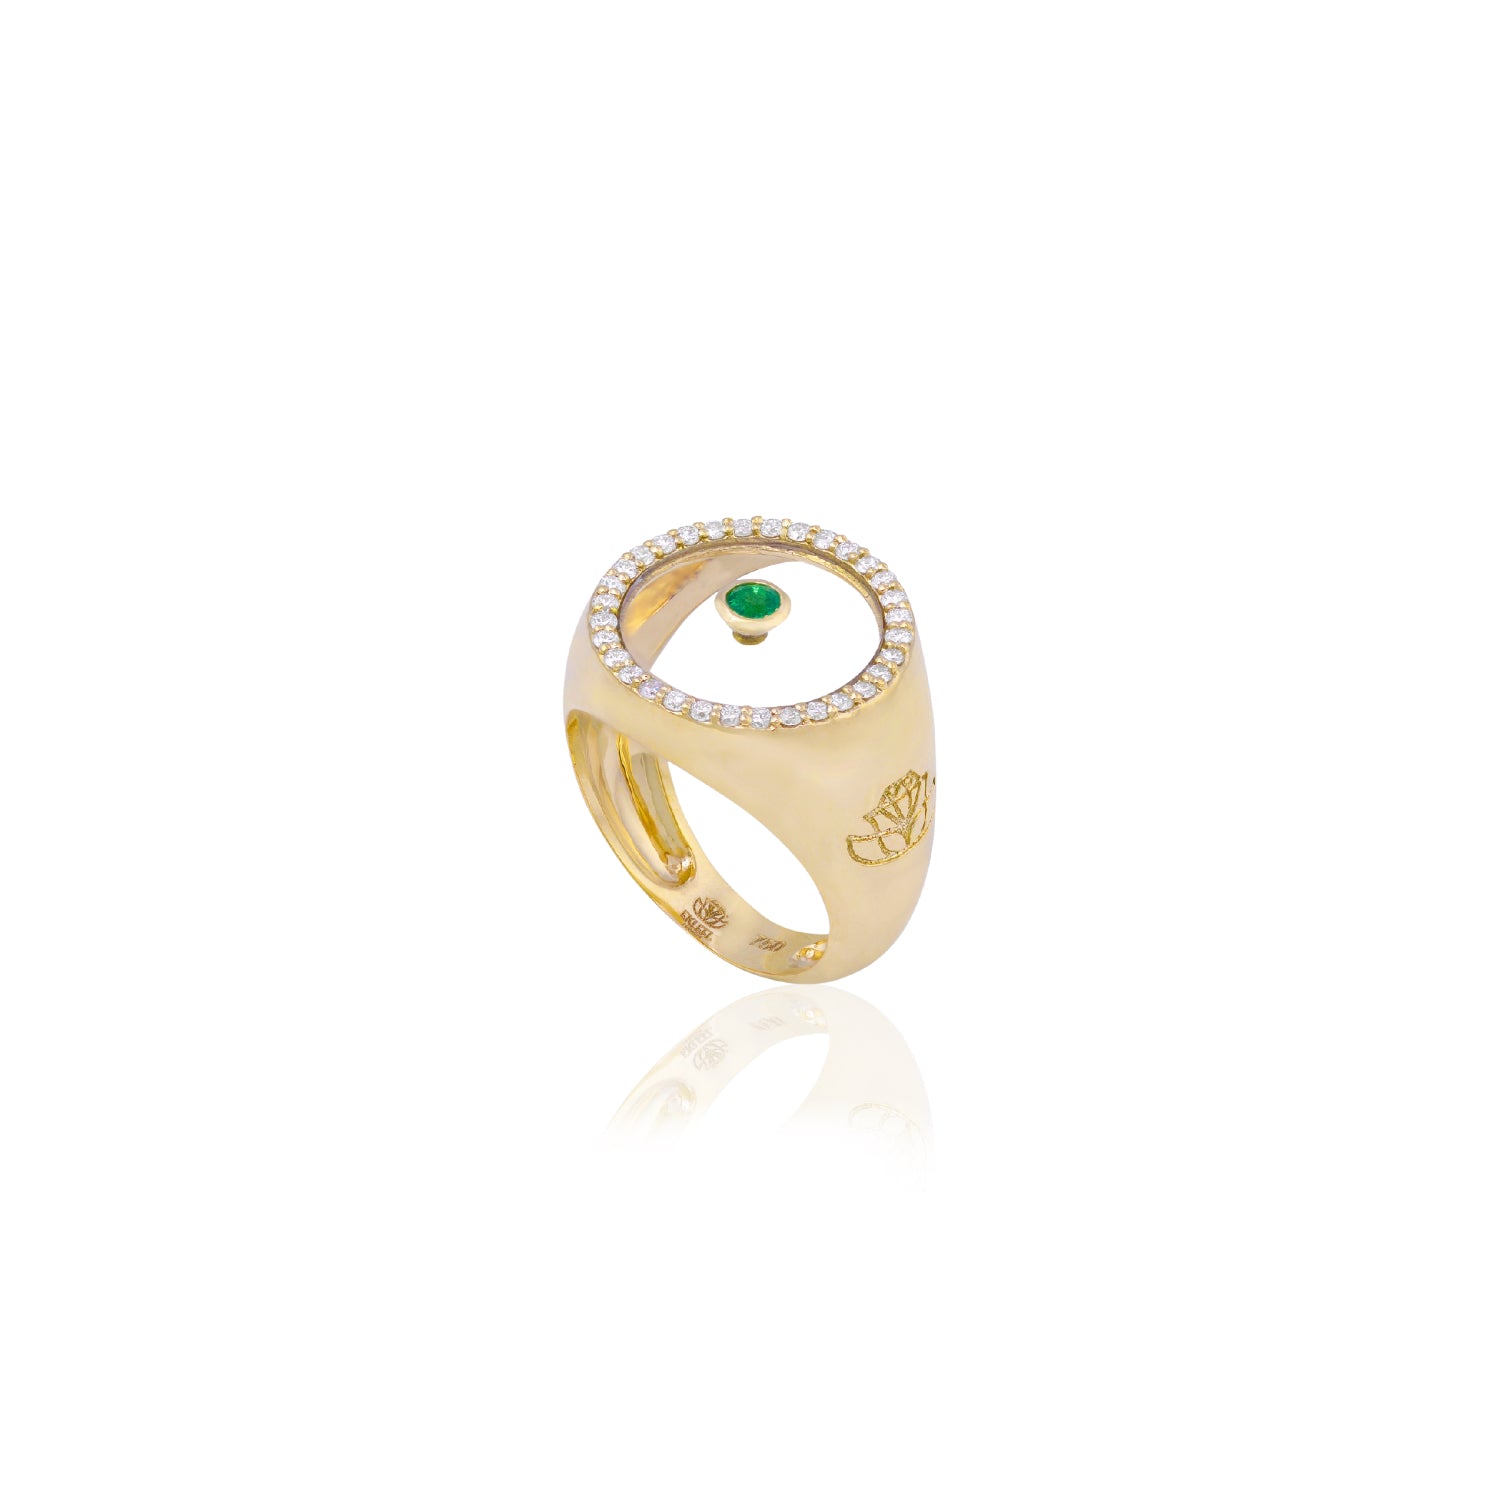 Emerald May Birthstone Ring in Yellow Gold